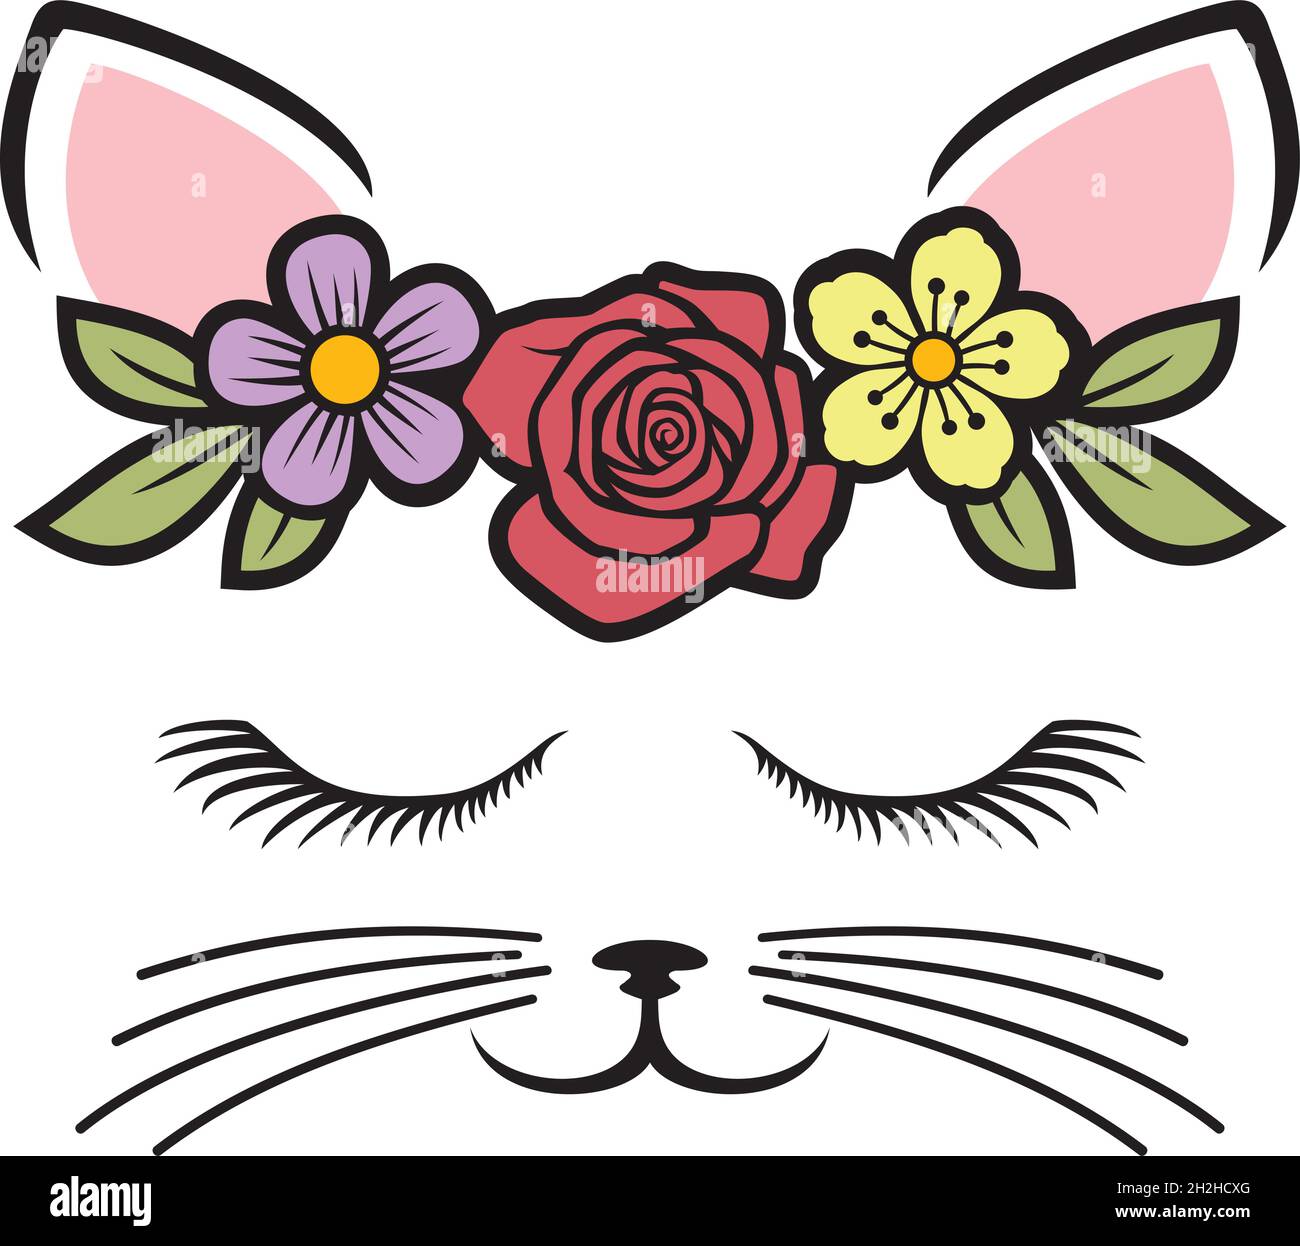 Cat with flower color vector illustration Stock Vector